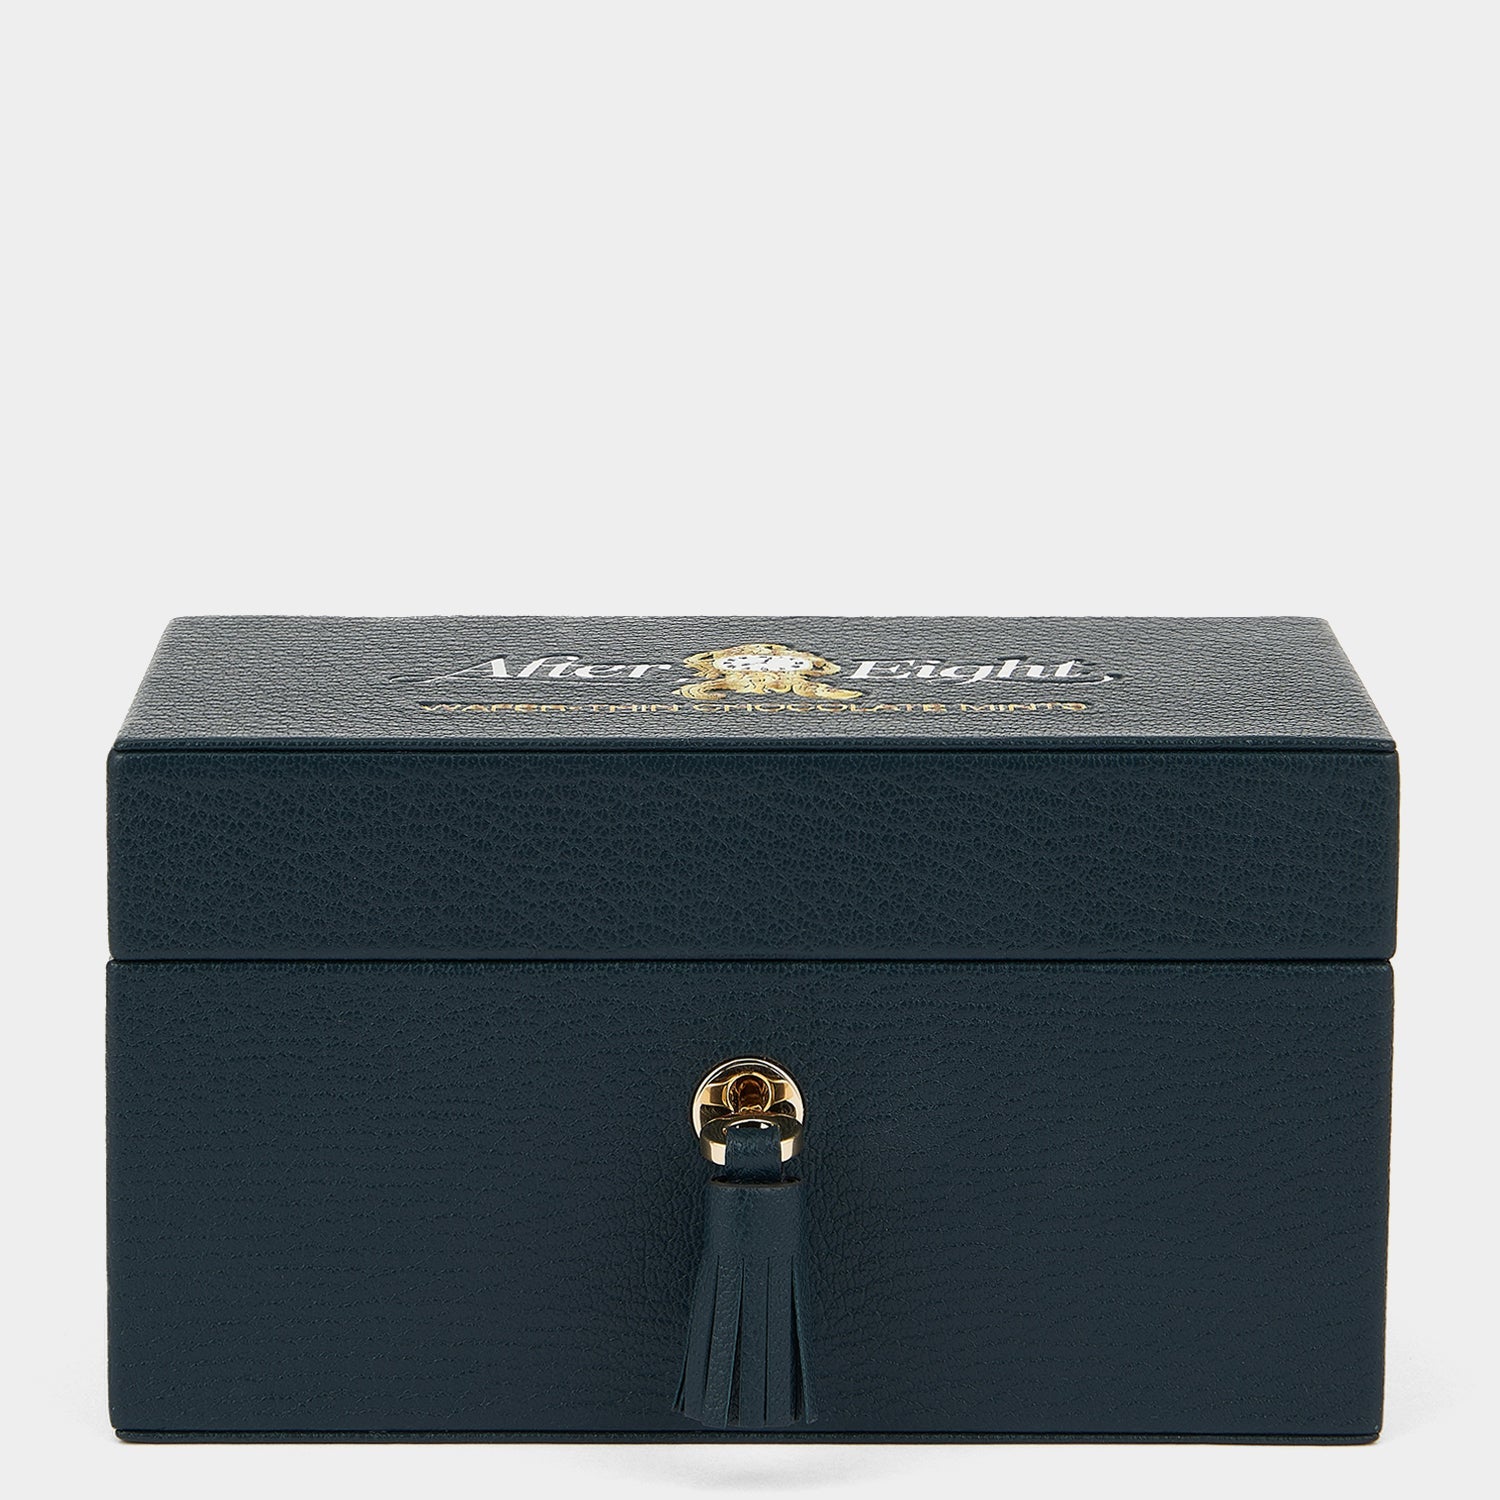 Anya Brands After Eight Box -

                  
                    Capra Leather in Dark Holly -
                  

                  Anya Hindmarch US
